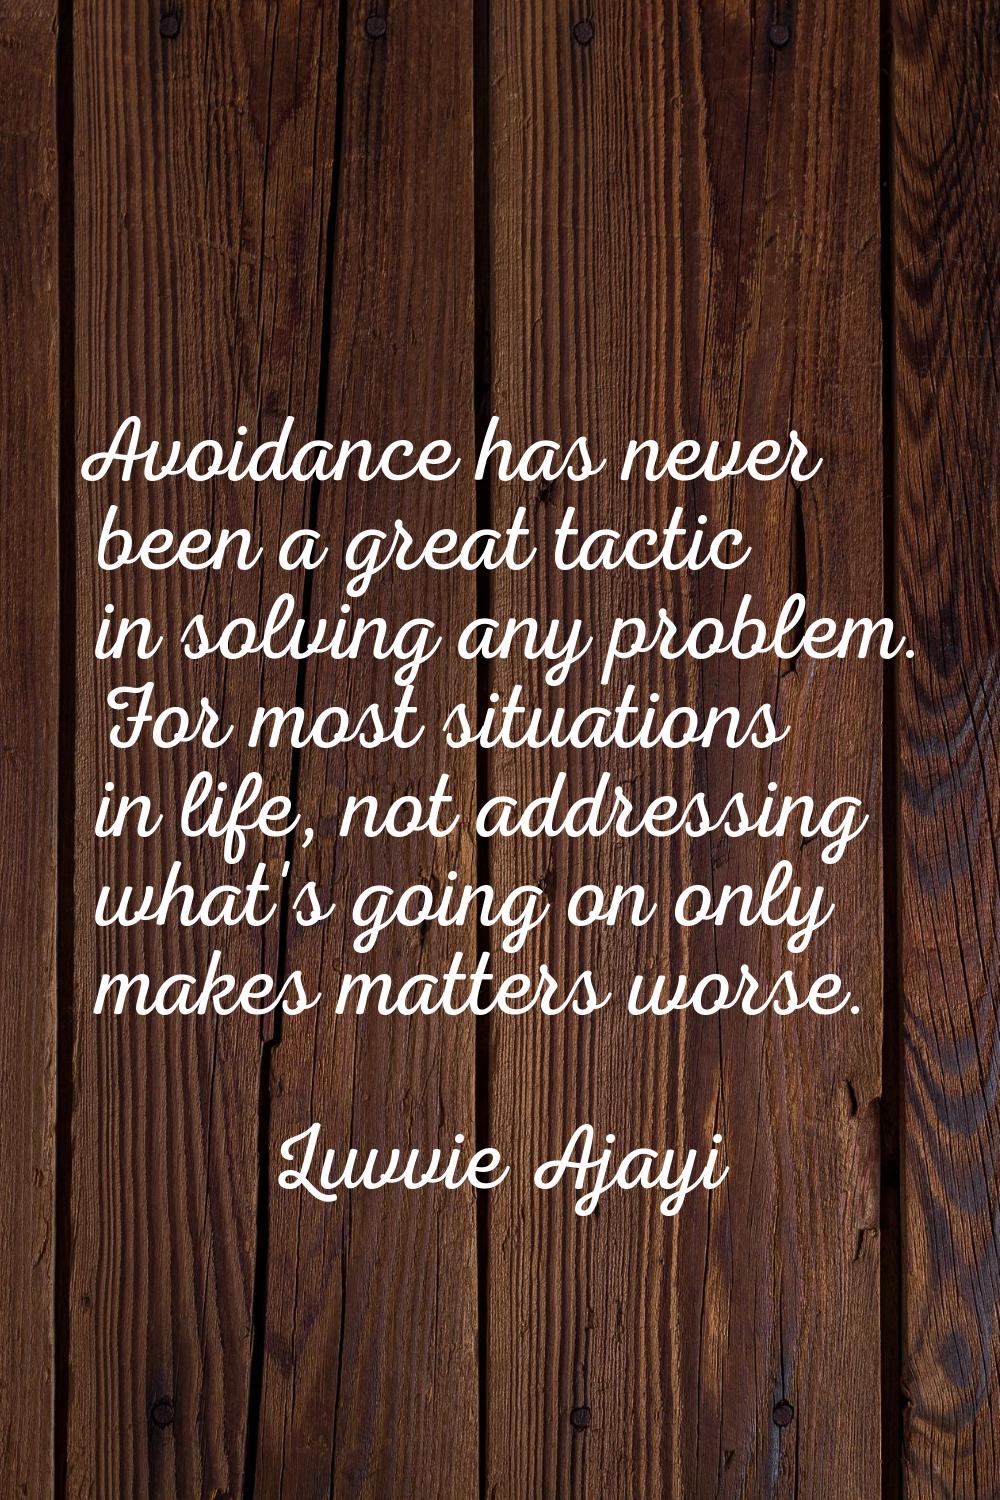 Avoidance has never been a great tactic in solving any problem. For most situations in life, not ad